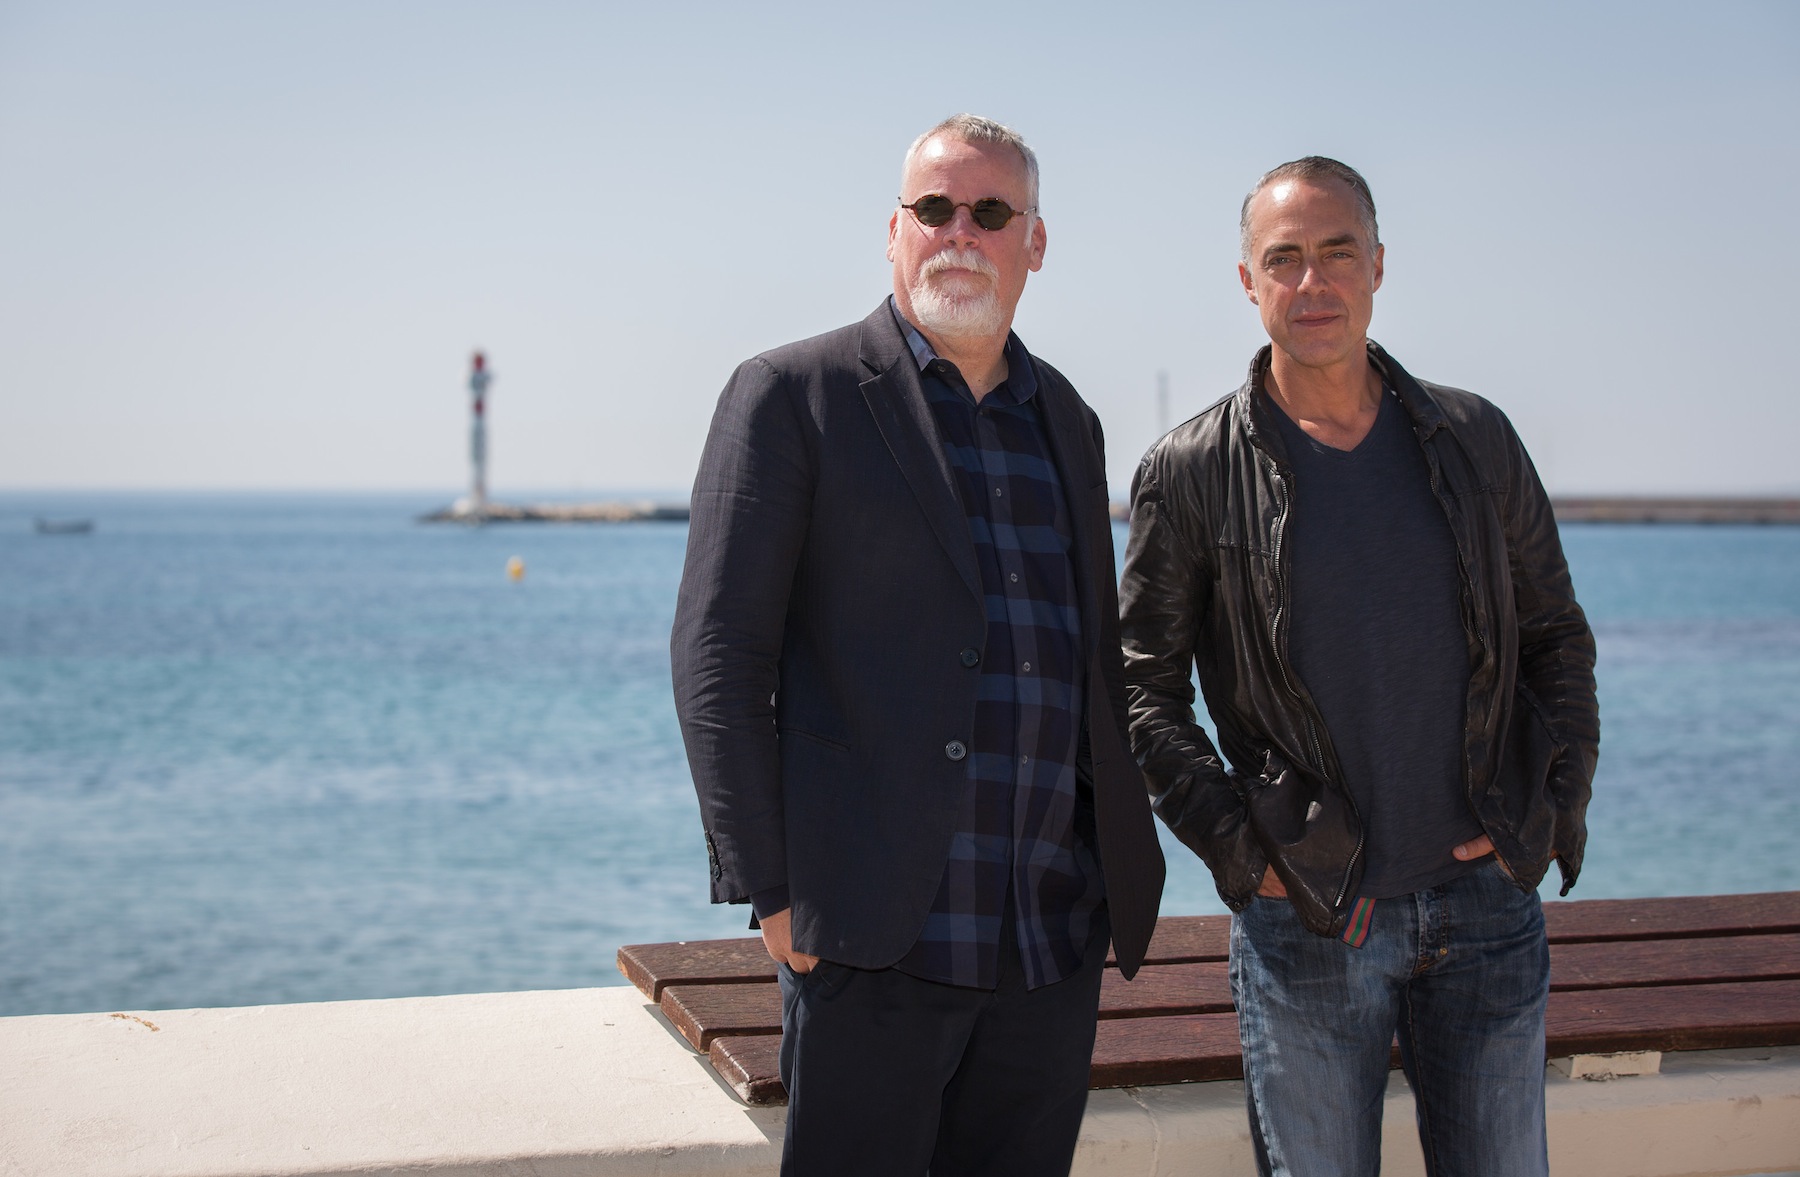 Michael Connelly (L) and 'Bosch' star Titus Welliver (R) pose on April 7, 2014 in Cannes, France. (Didier Baverel—WireImage / Getty Images)